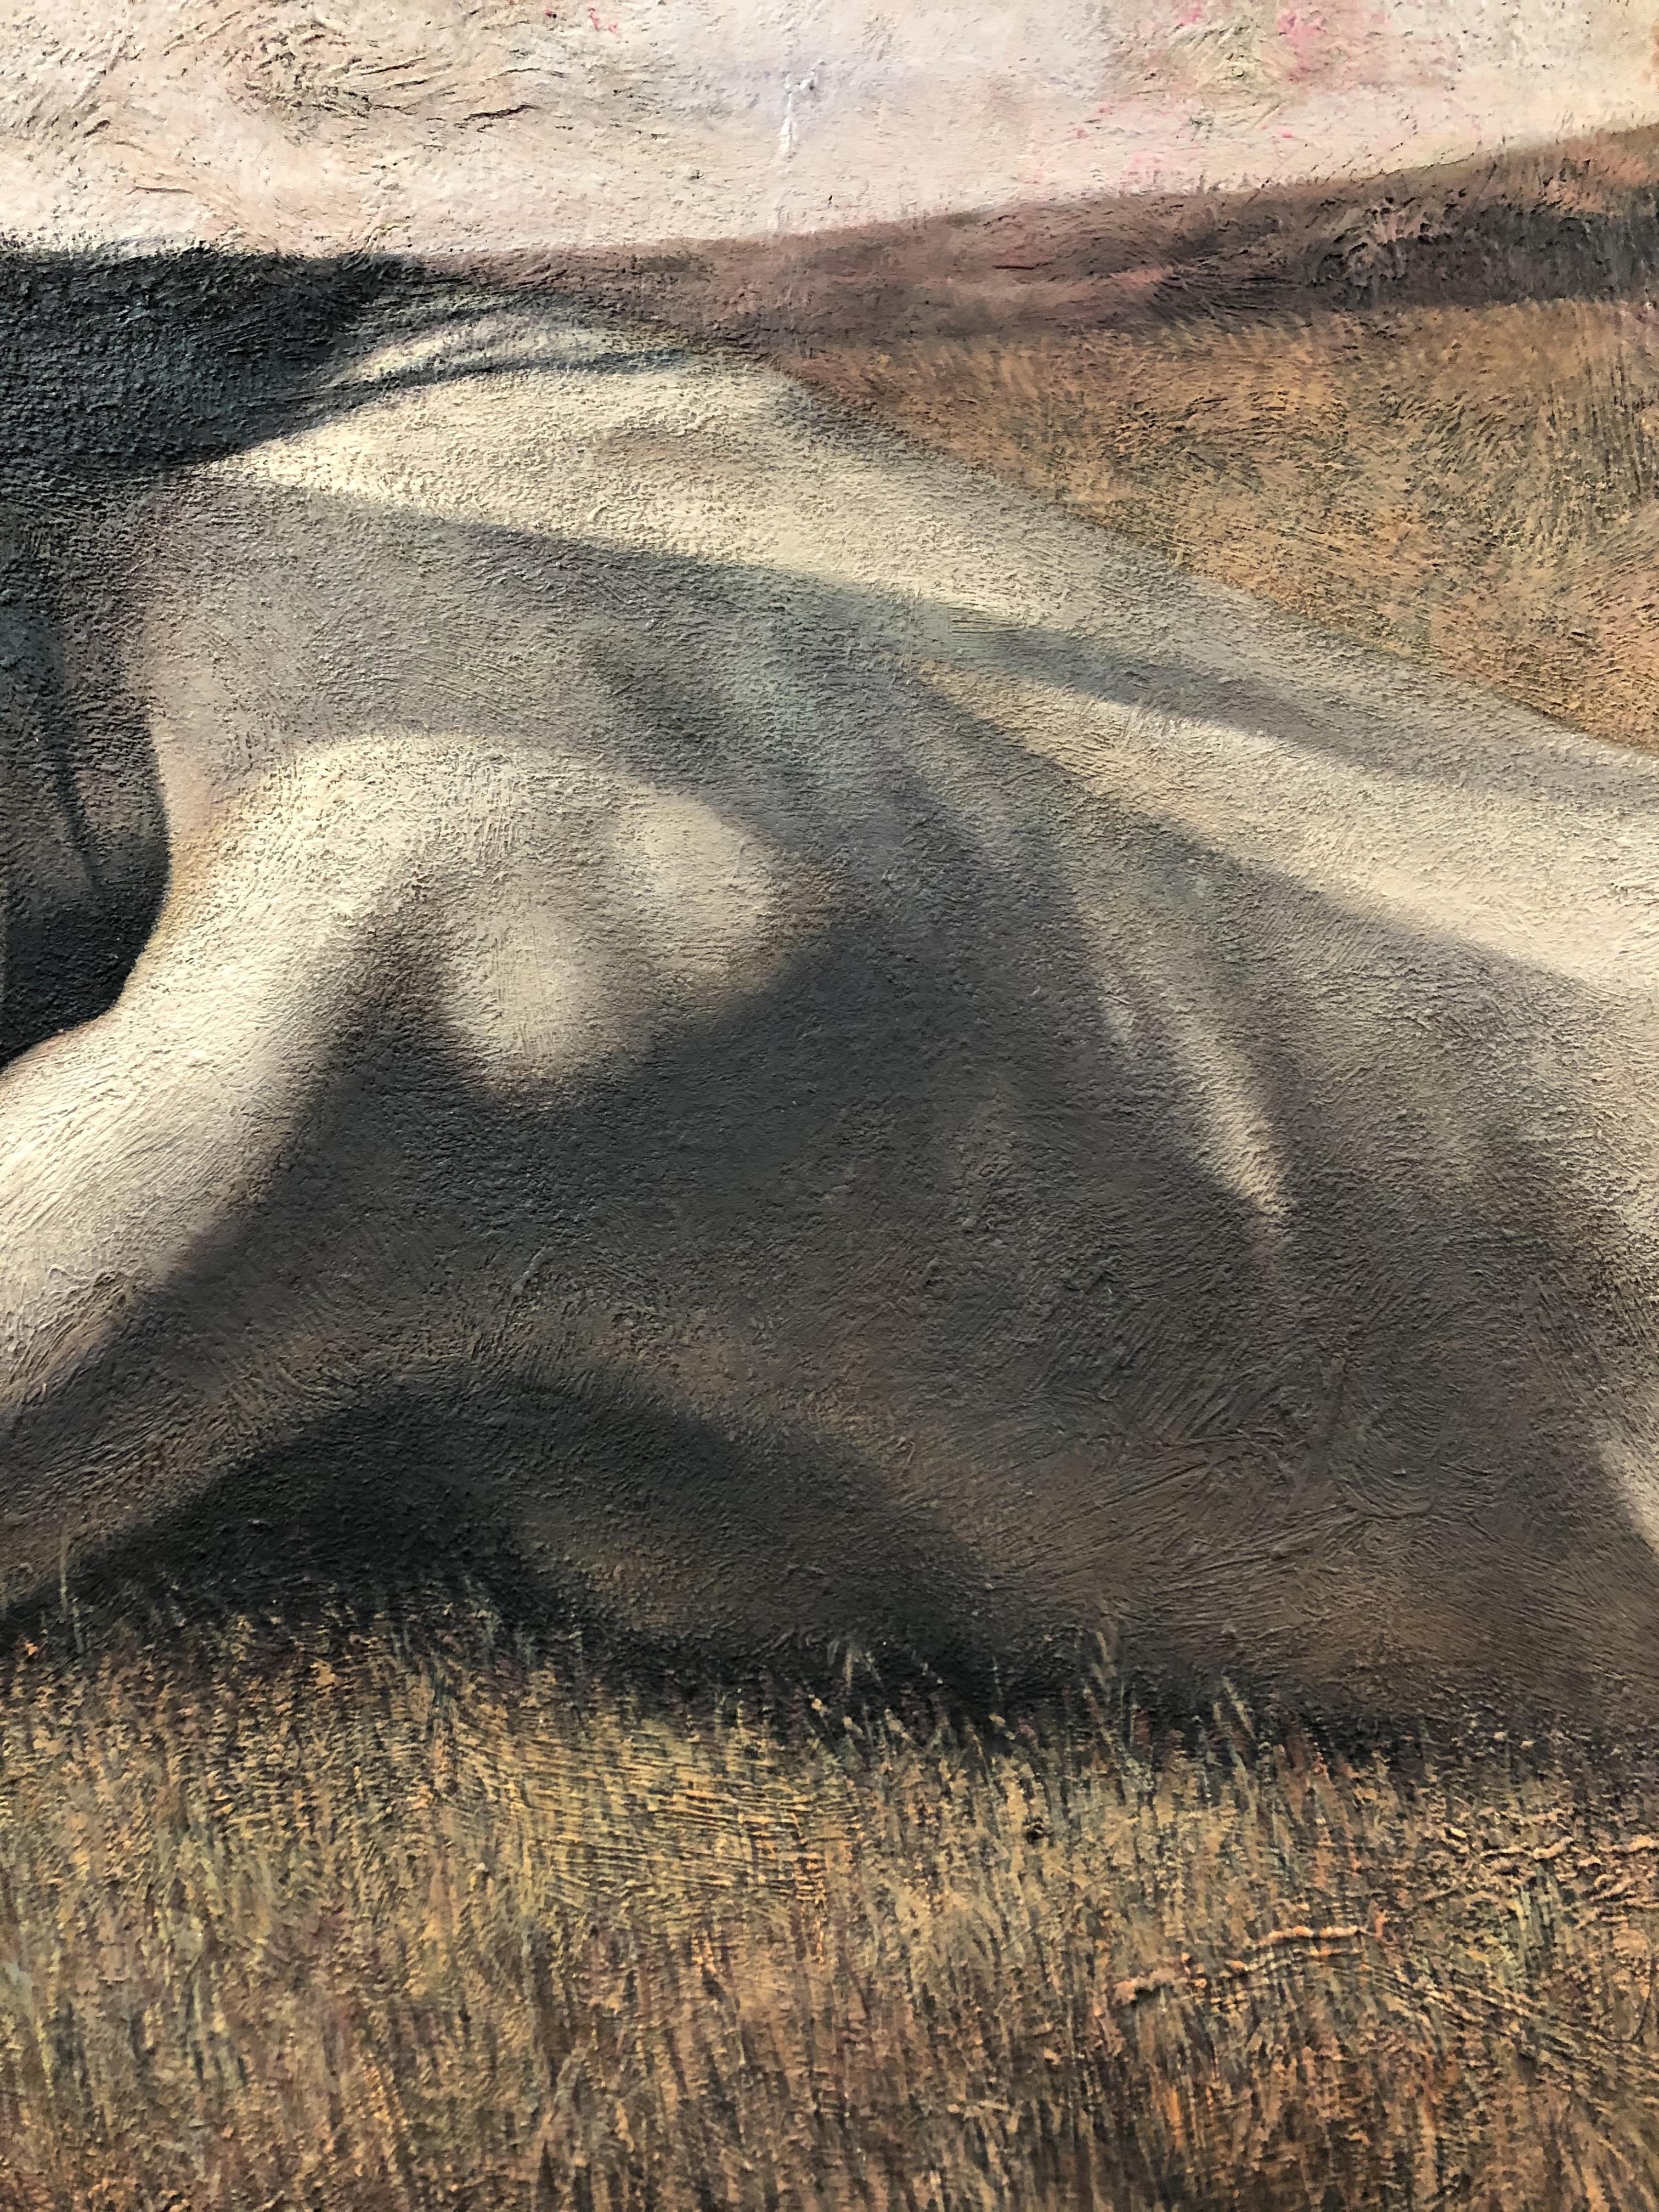 Jia Ke (Chinese 20th-21st Century) Sleeping nude Lying in a Field, signed Jia Ke(?), and dated - Image 9 of 20